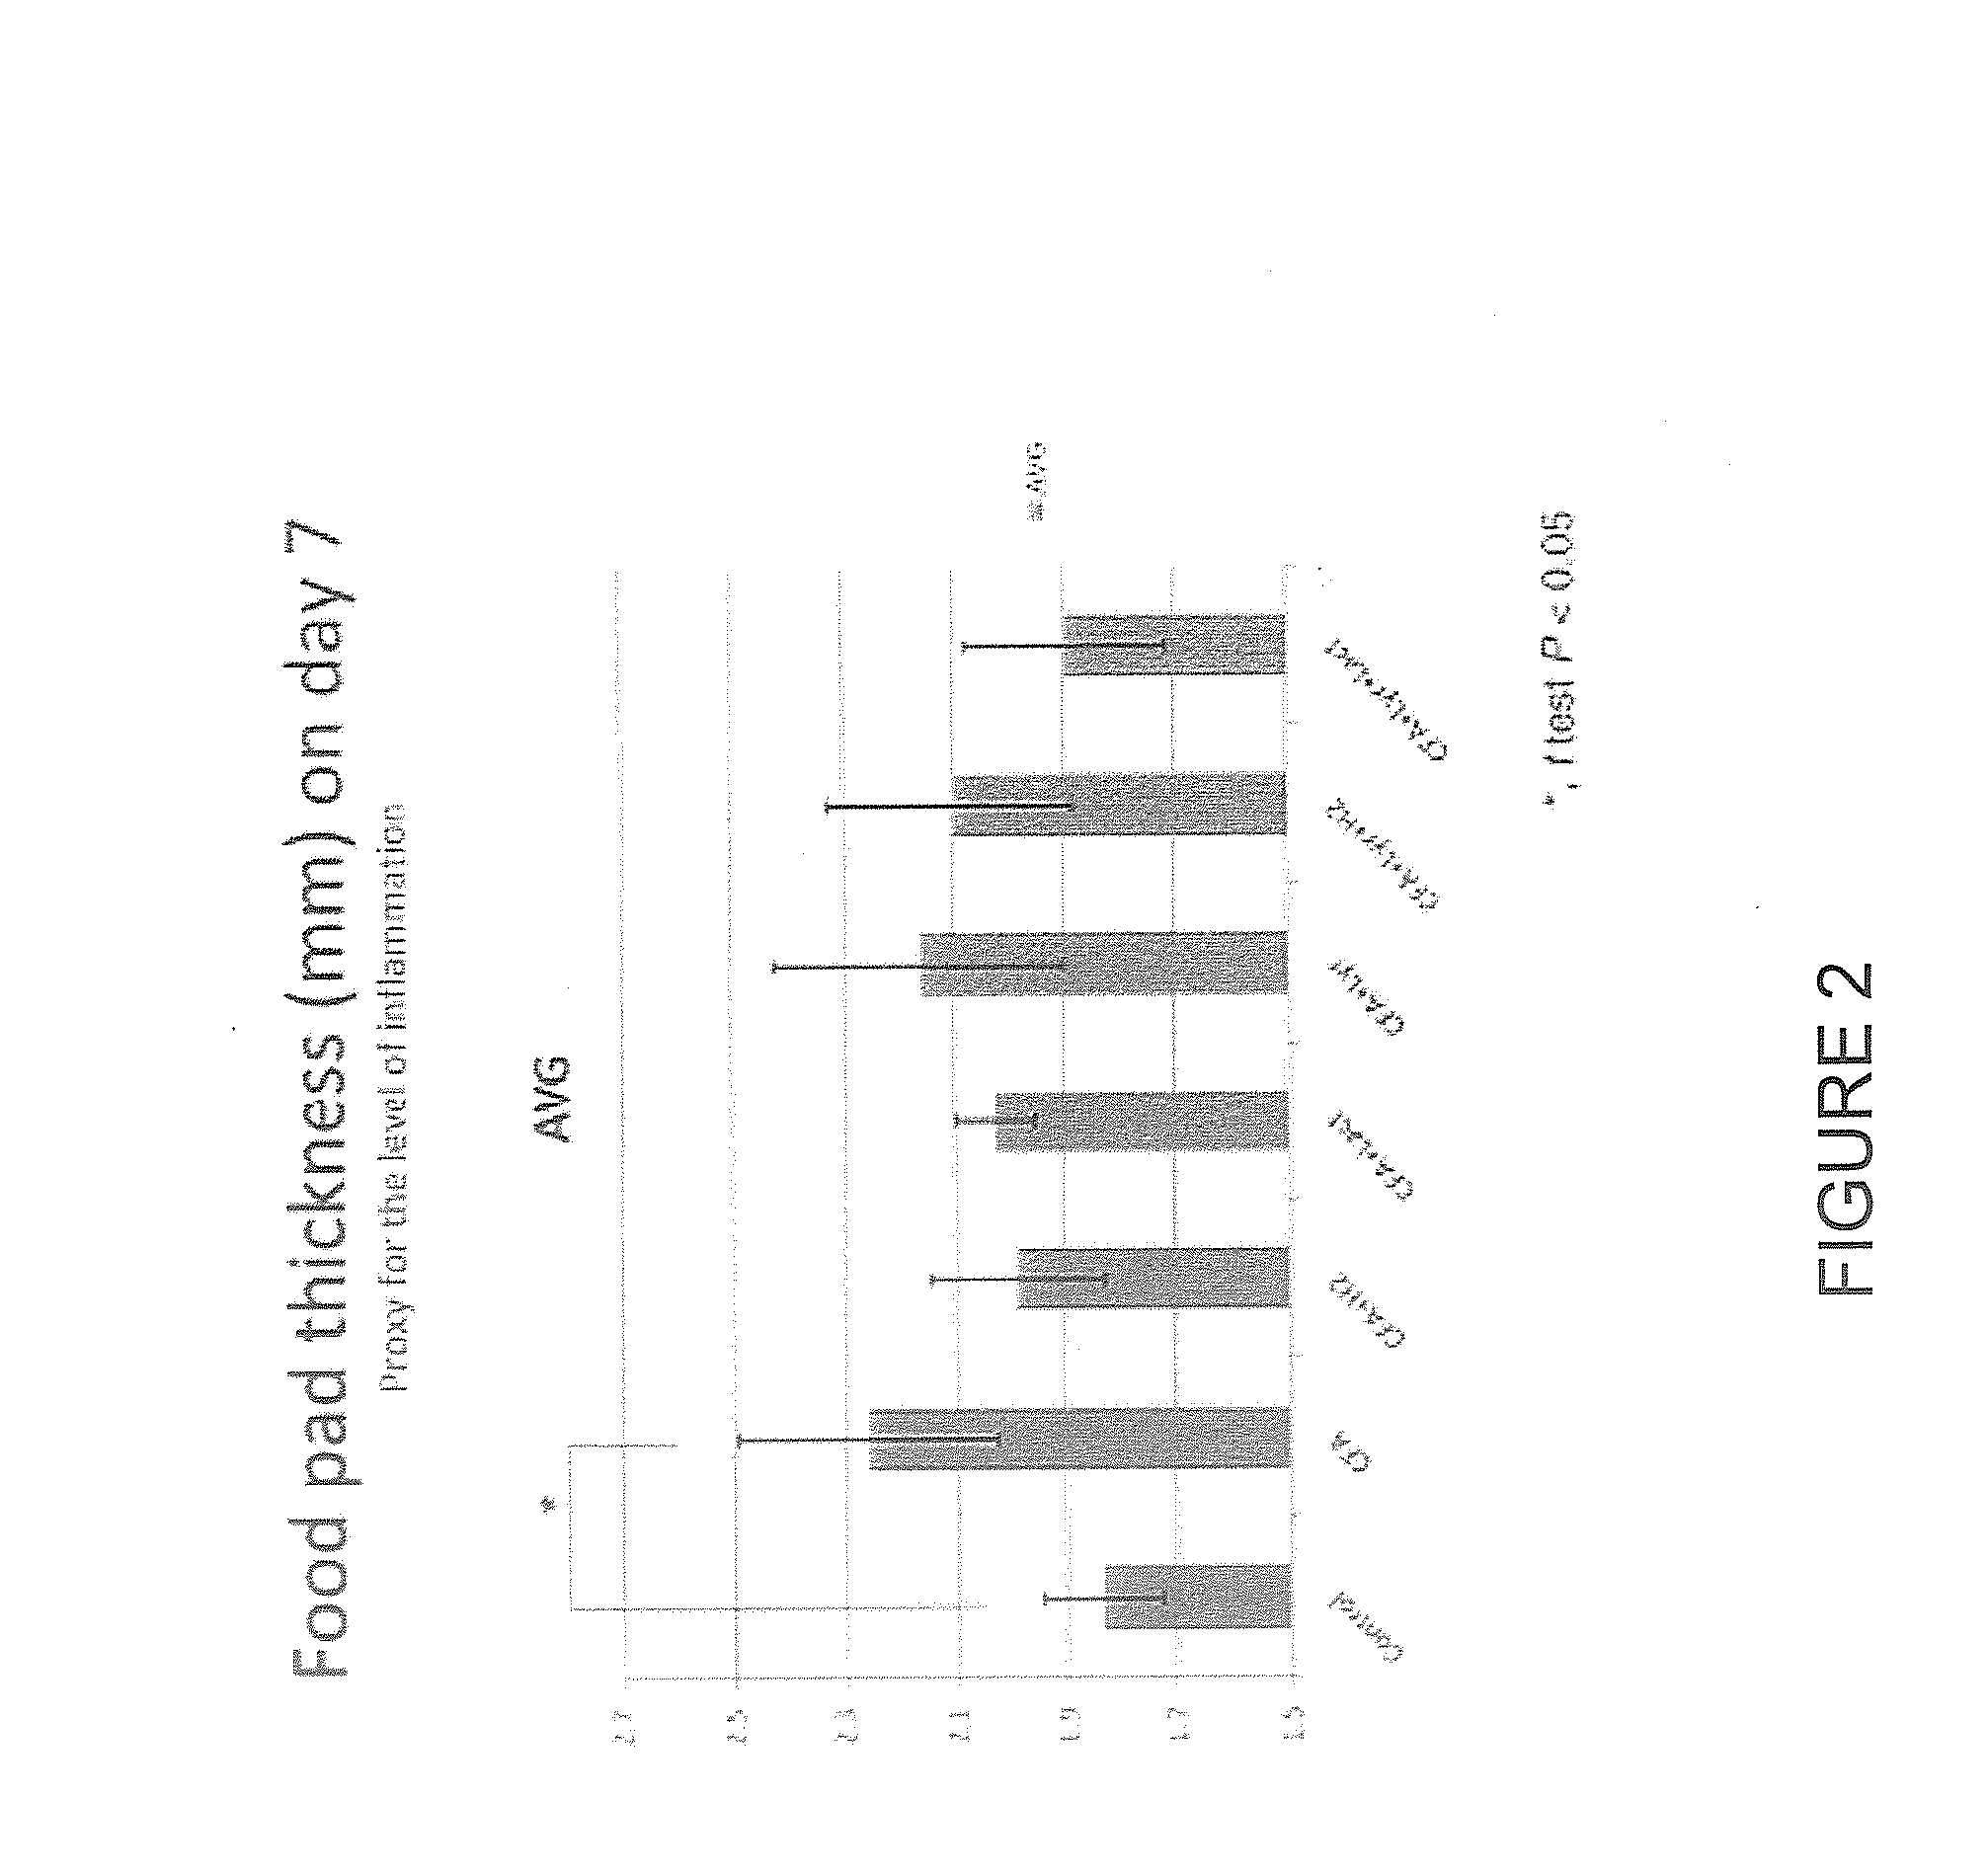 Anti-inflammatory compounds in combination with hydrogen for the treatment of inflammation